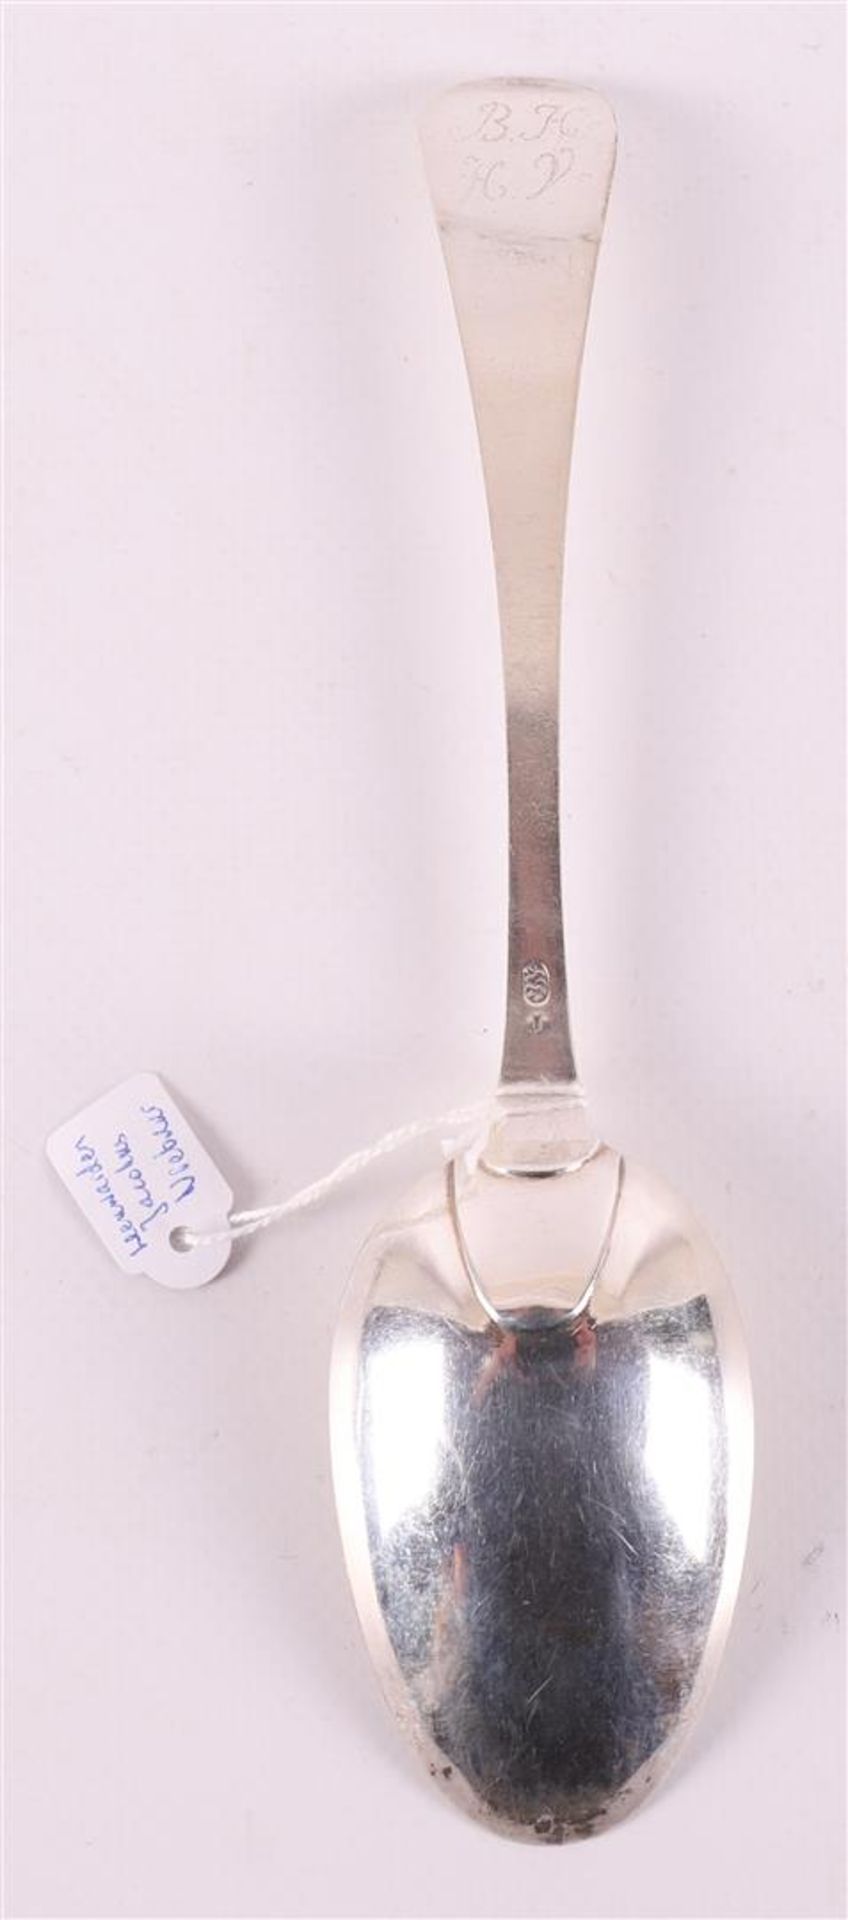 Four first grade content 925/1000 silver spoons, Friesland, Leeuwarden, - Image 7 of 7